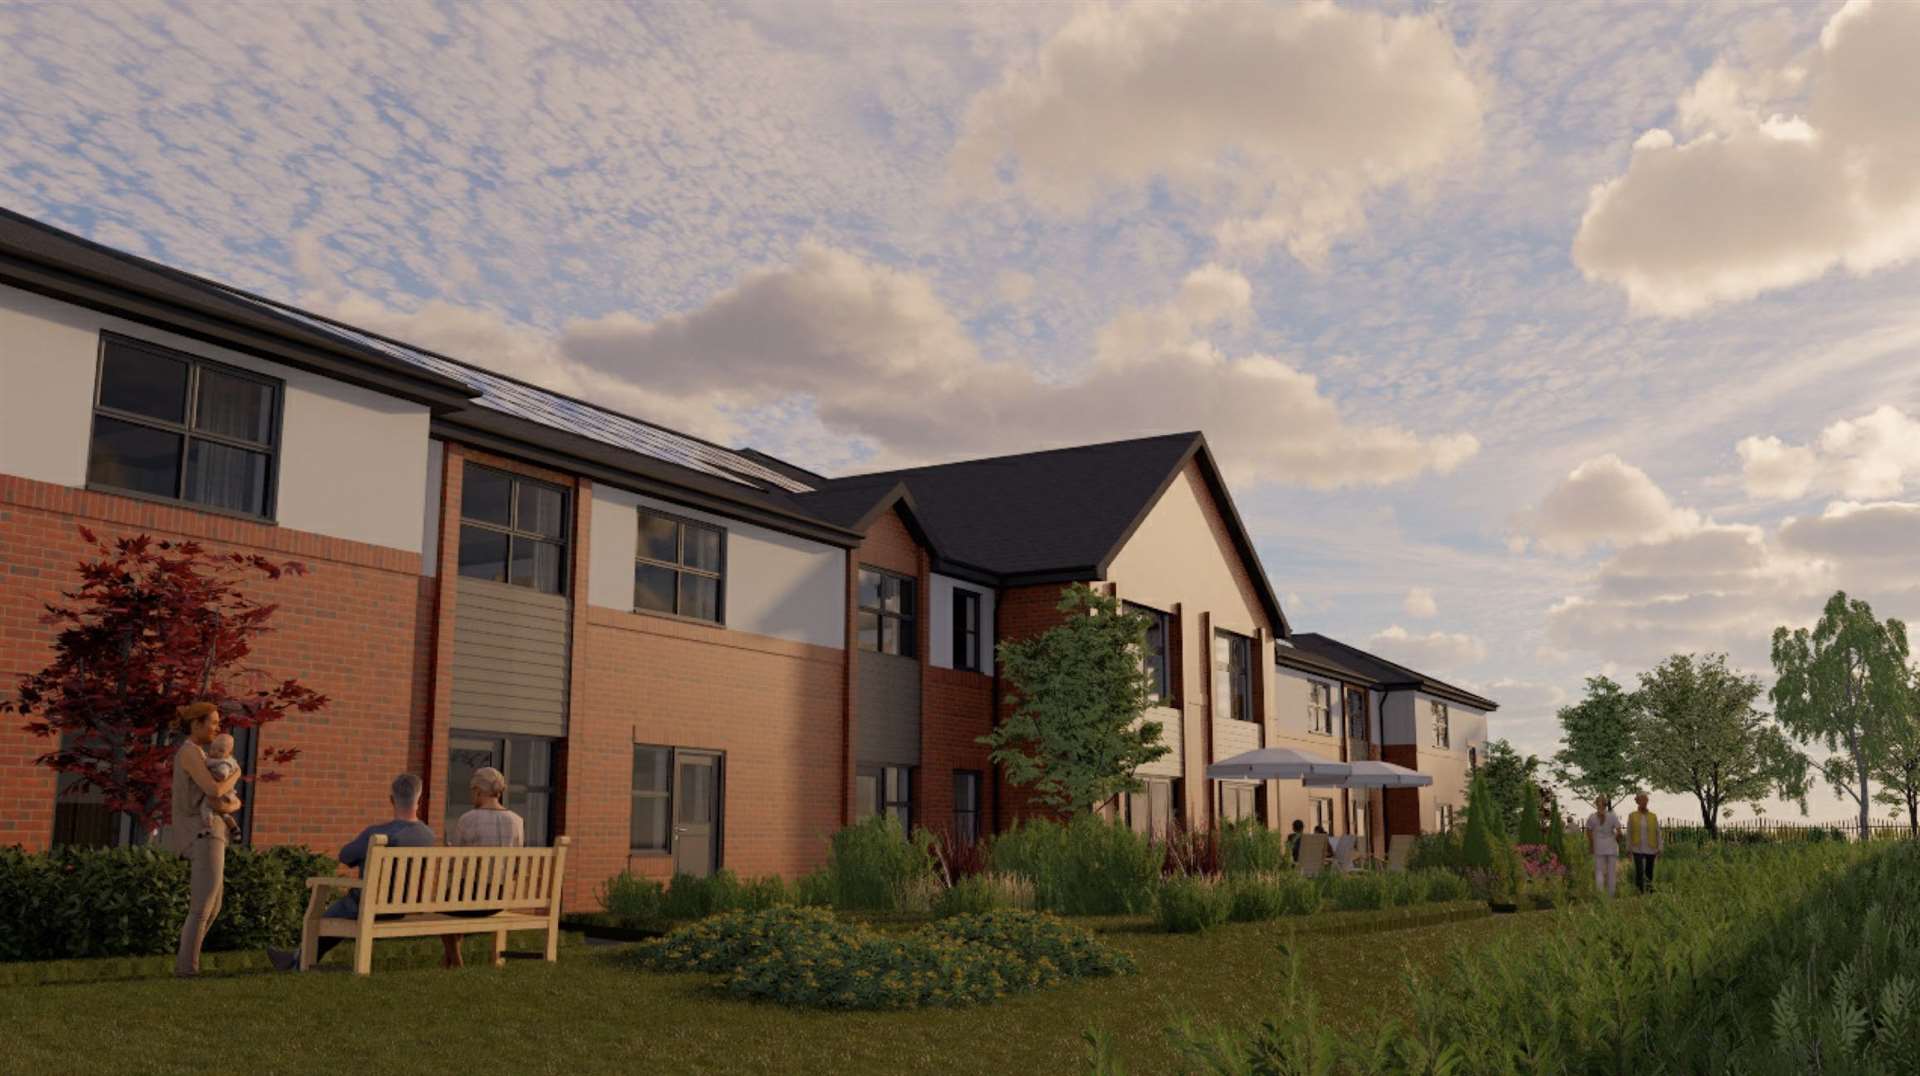 The 66-room nursing home would be located on a largely empty plot. Photo: LNT Care Developments